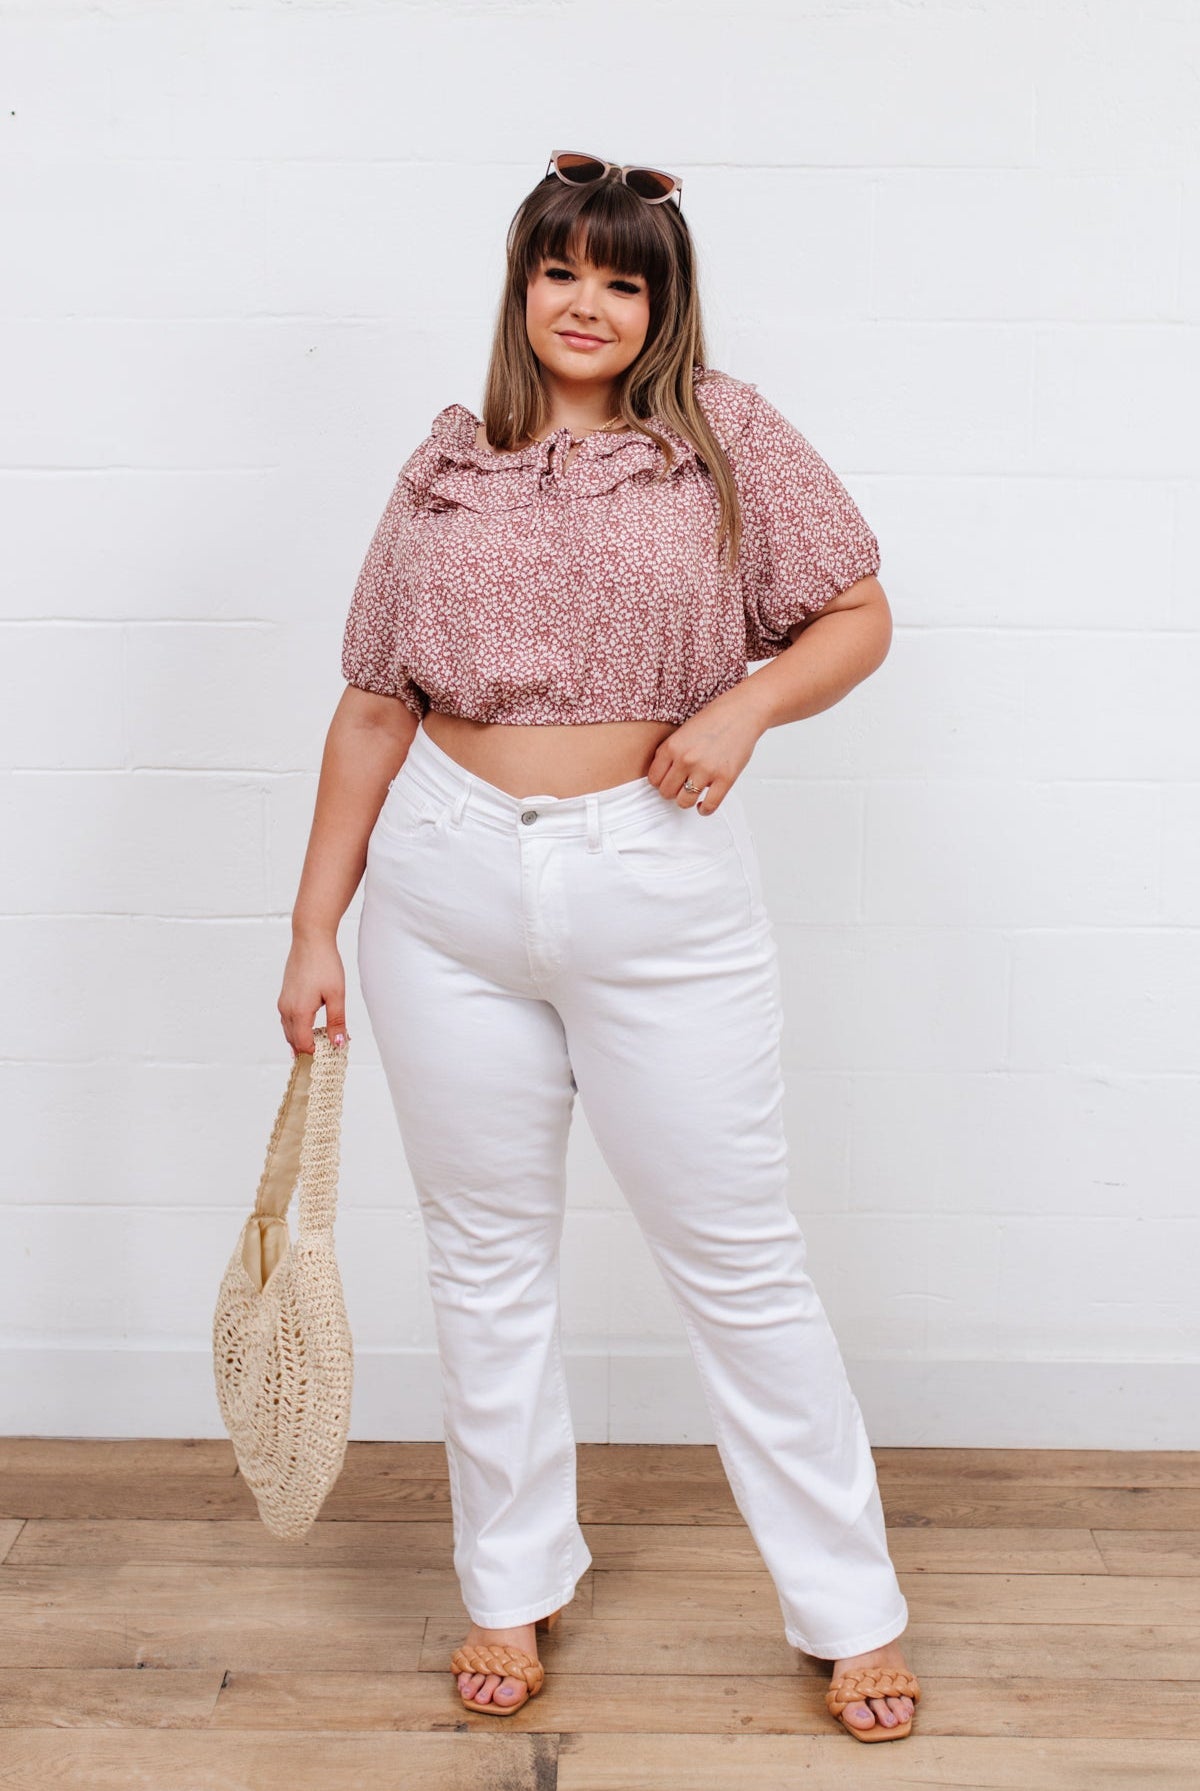 Golden Hour Top in Rose-100 Short Sleeves- Simply Simpson's Boutique is a Women's Online Fashion Boutique Located in Jupiter, Florida